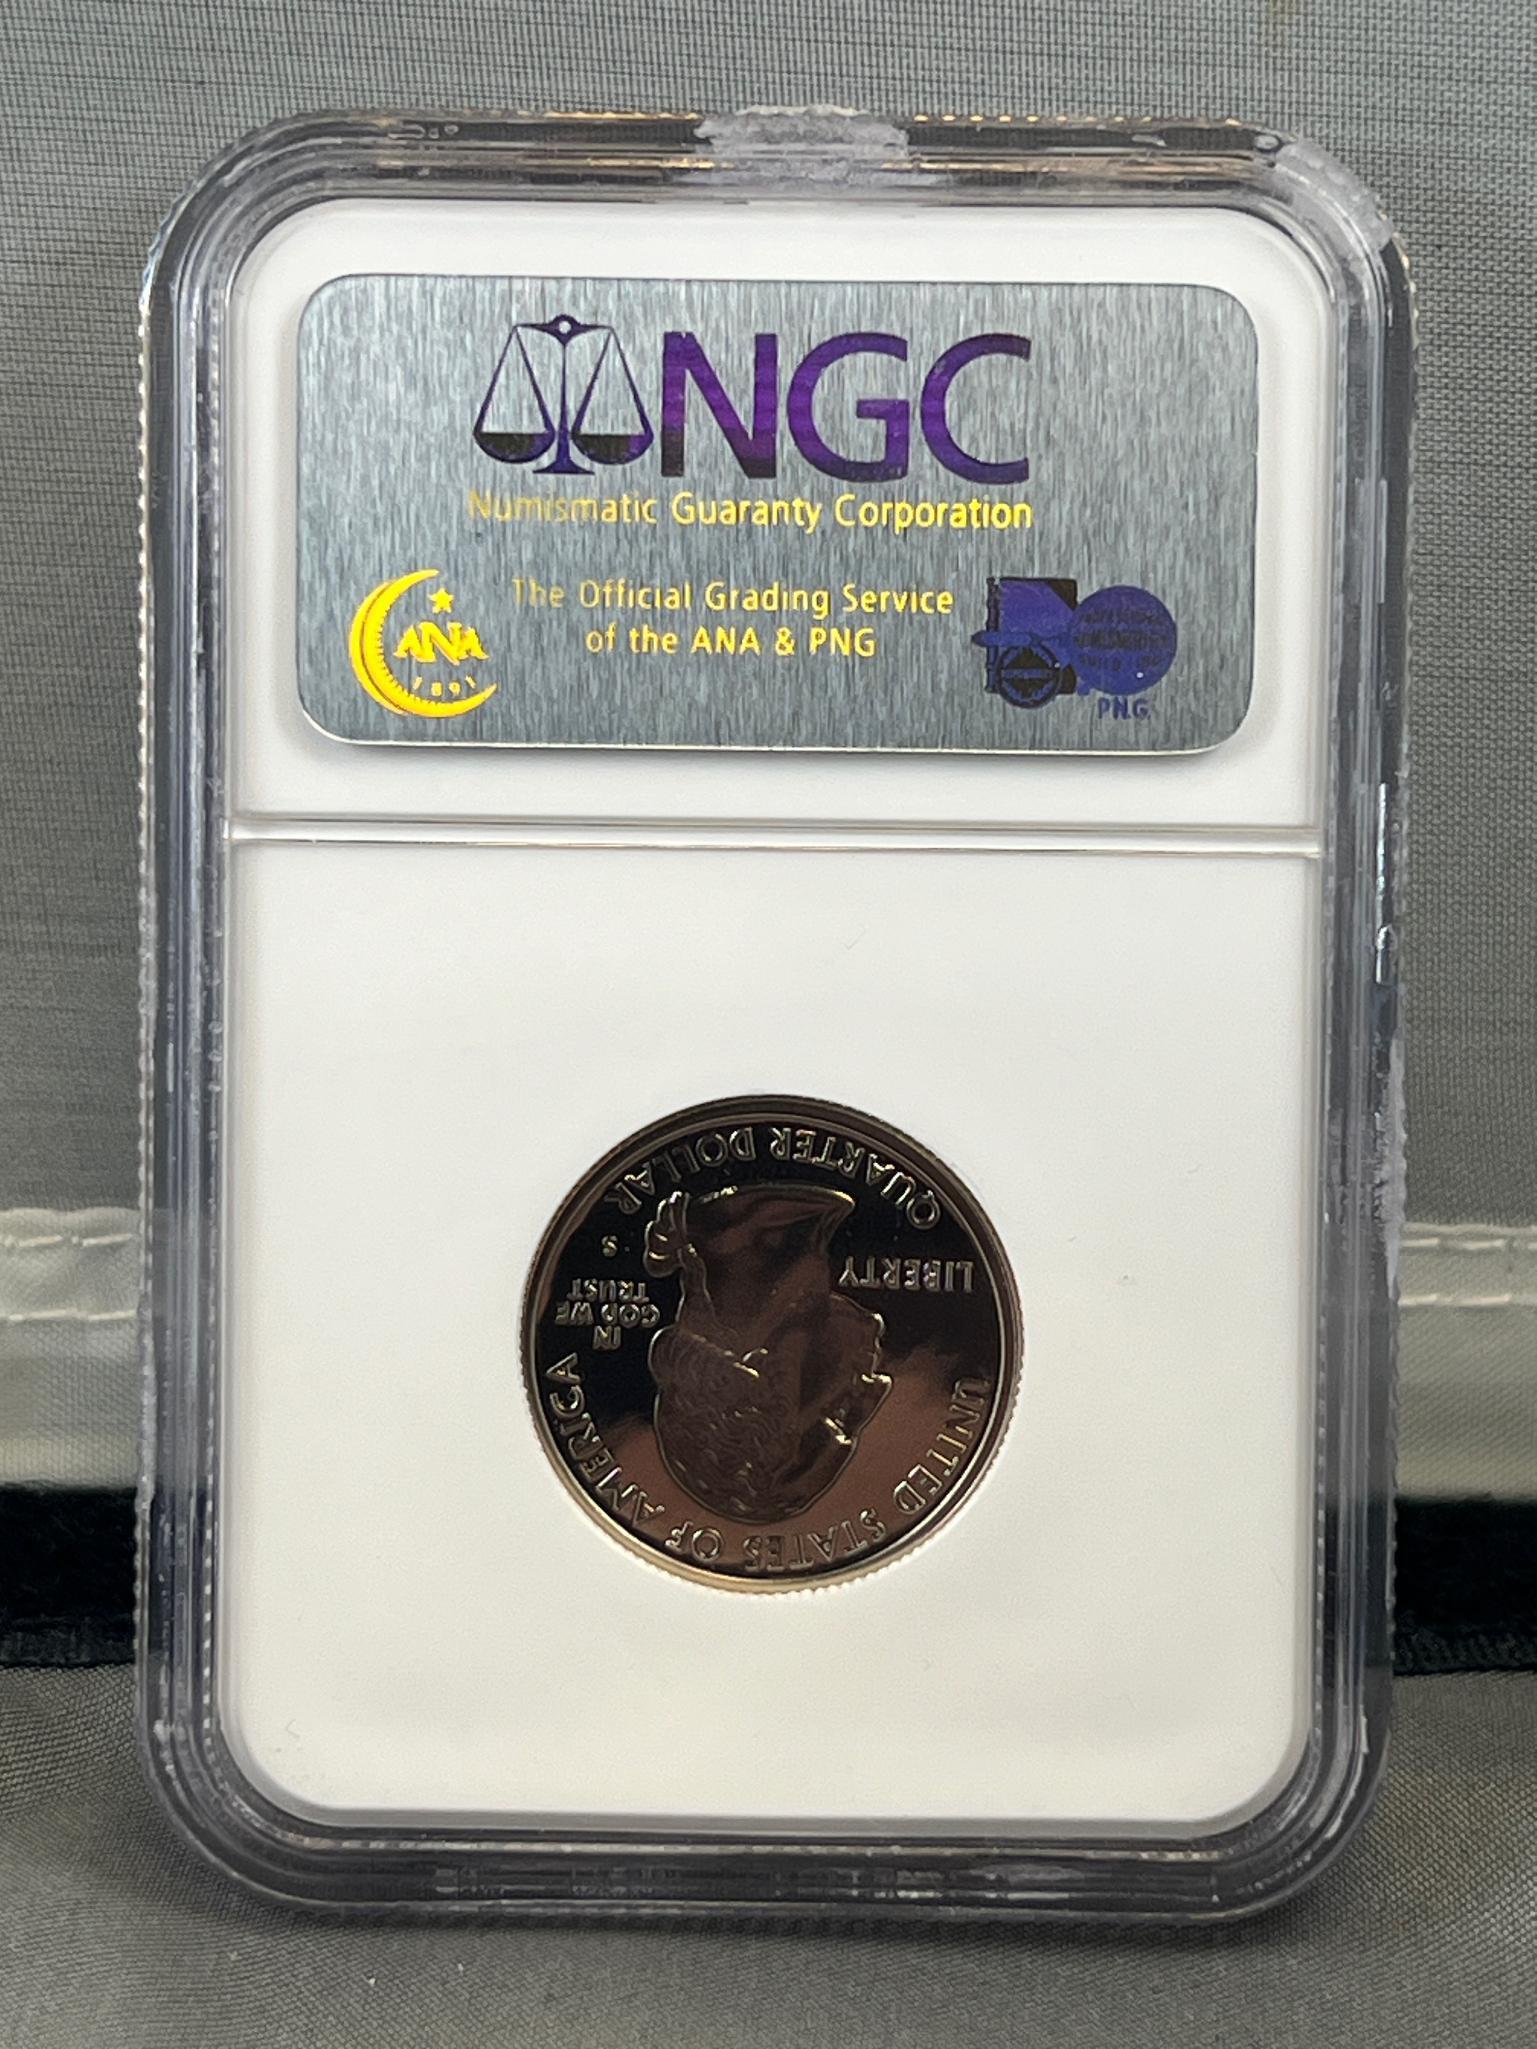 2001-S Clad Vermont Quarter in NGC PF69 Cameo holder